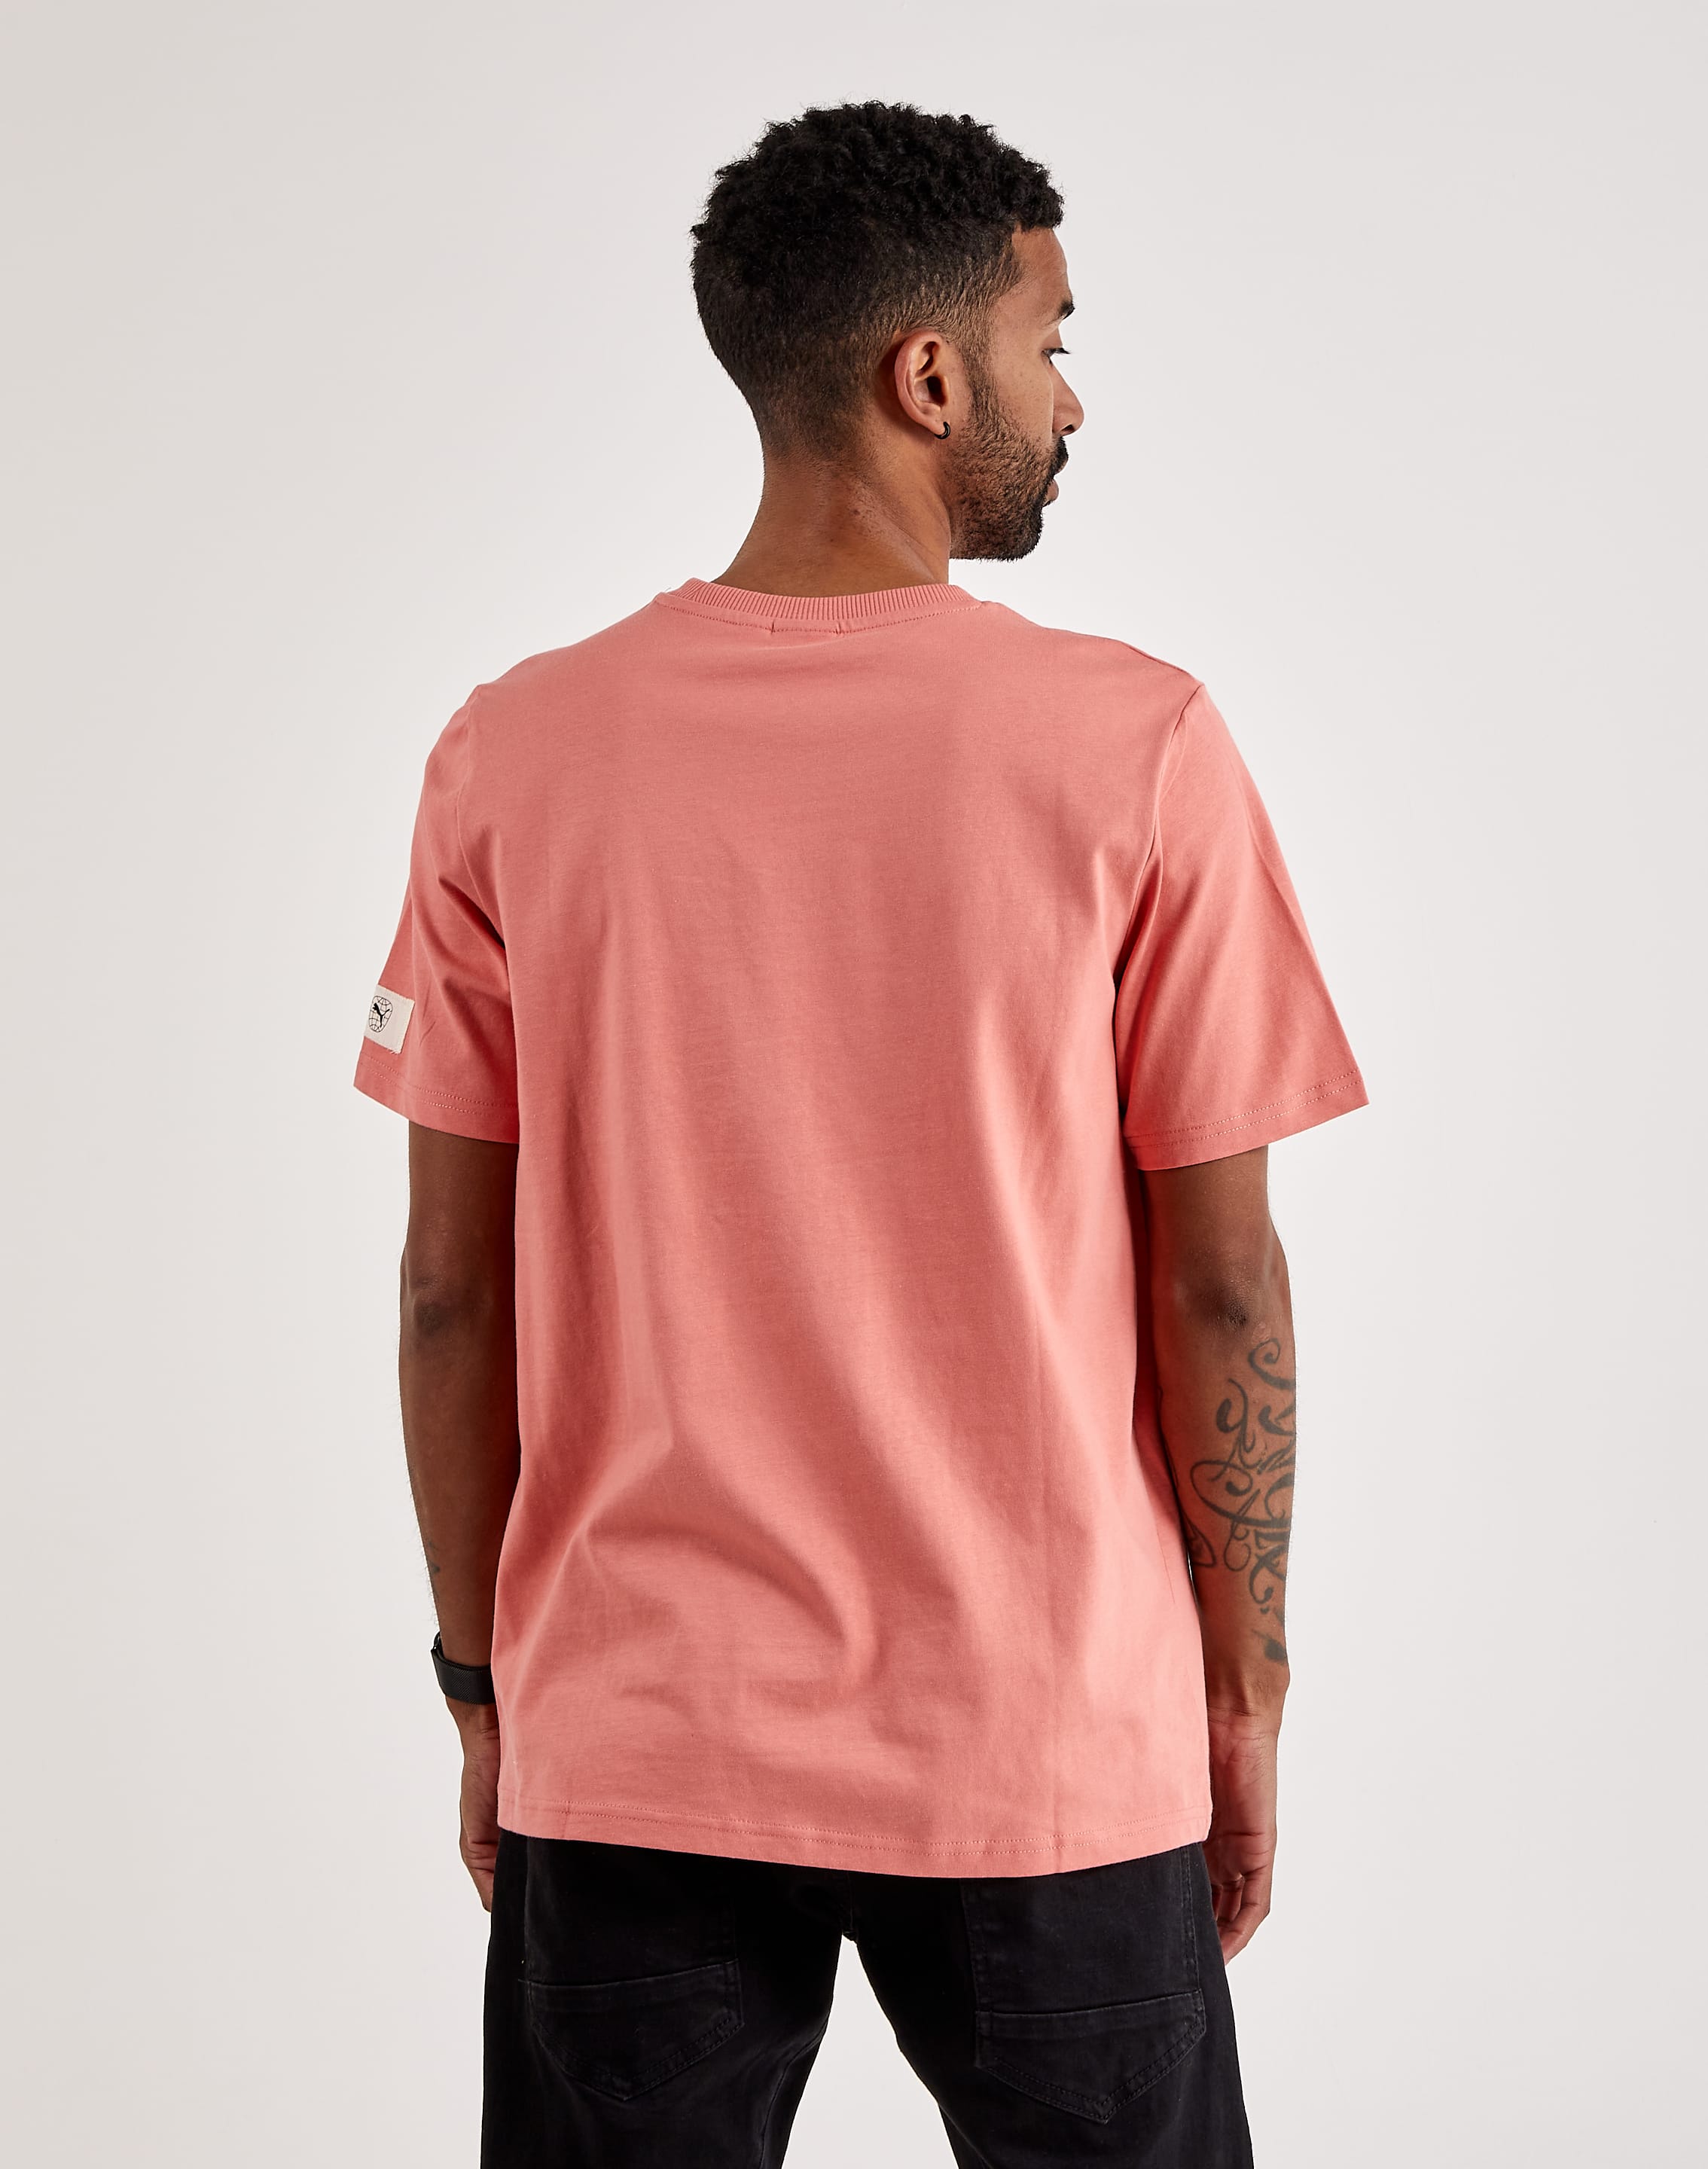 Puma Re:Escape Rotate Tee – DTLR